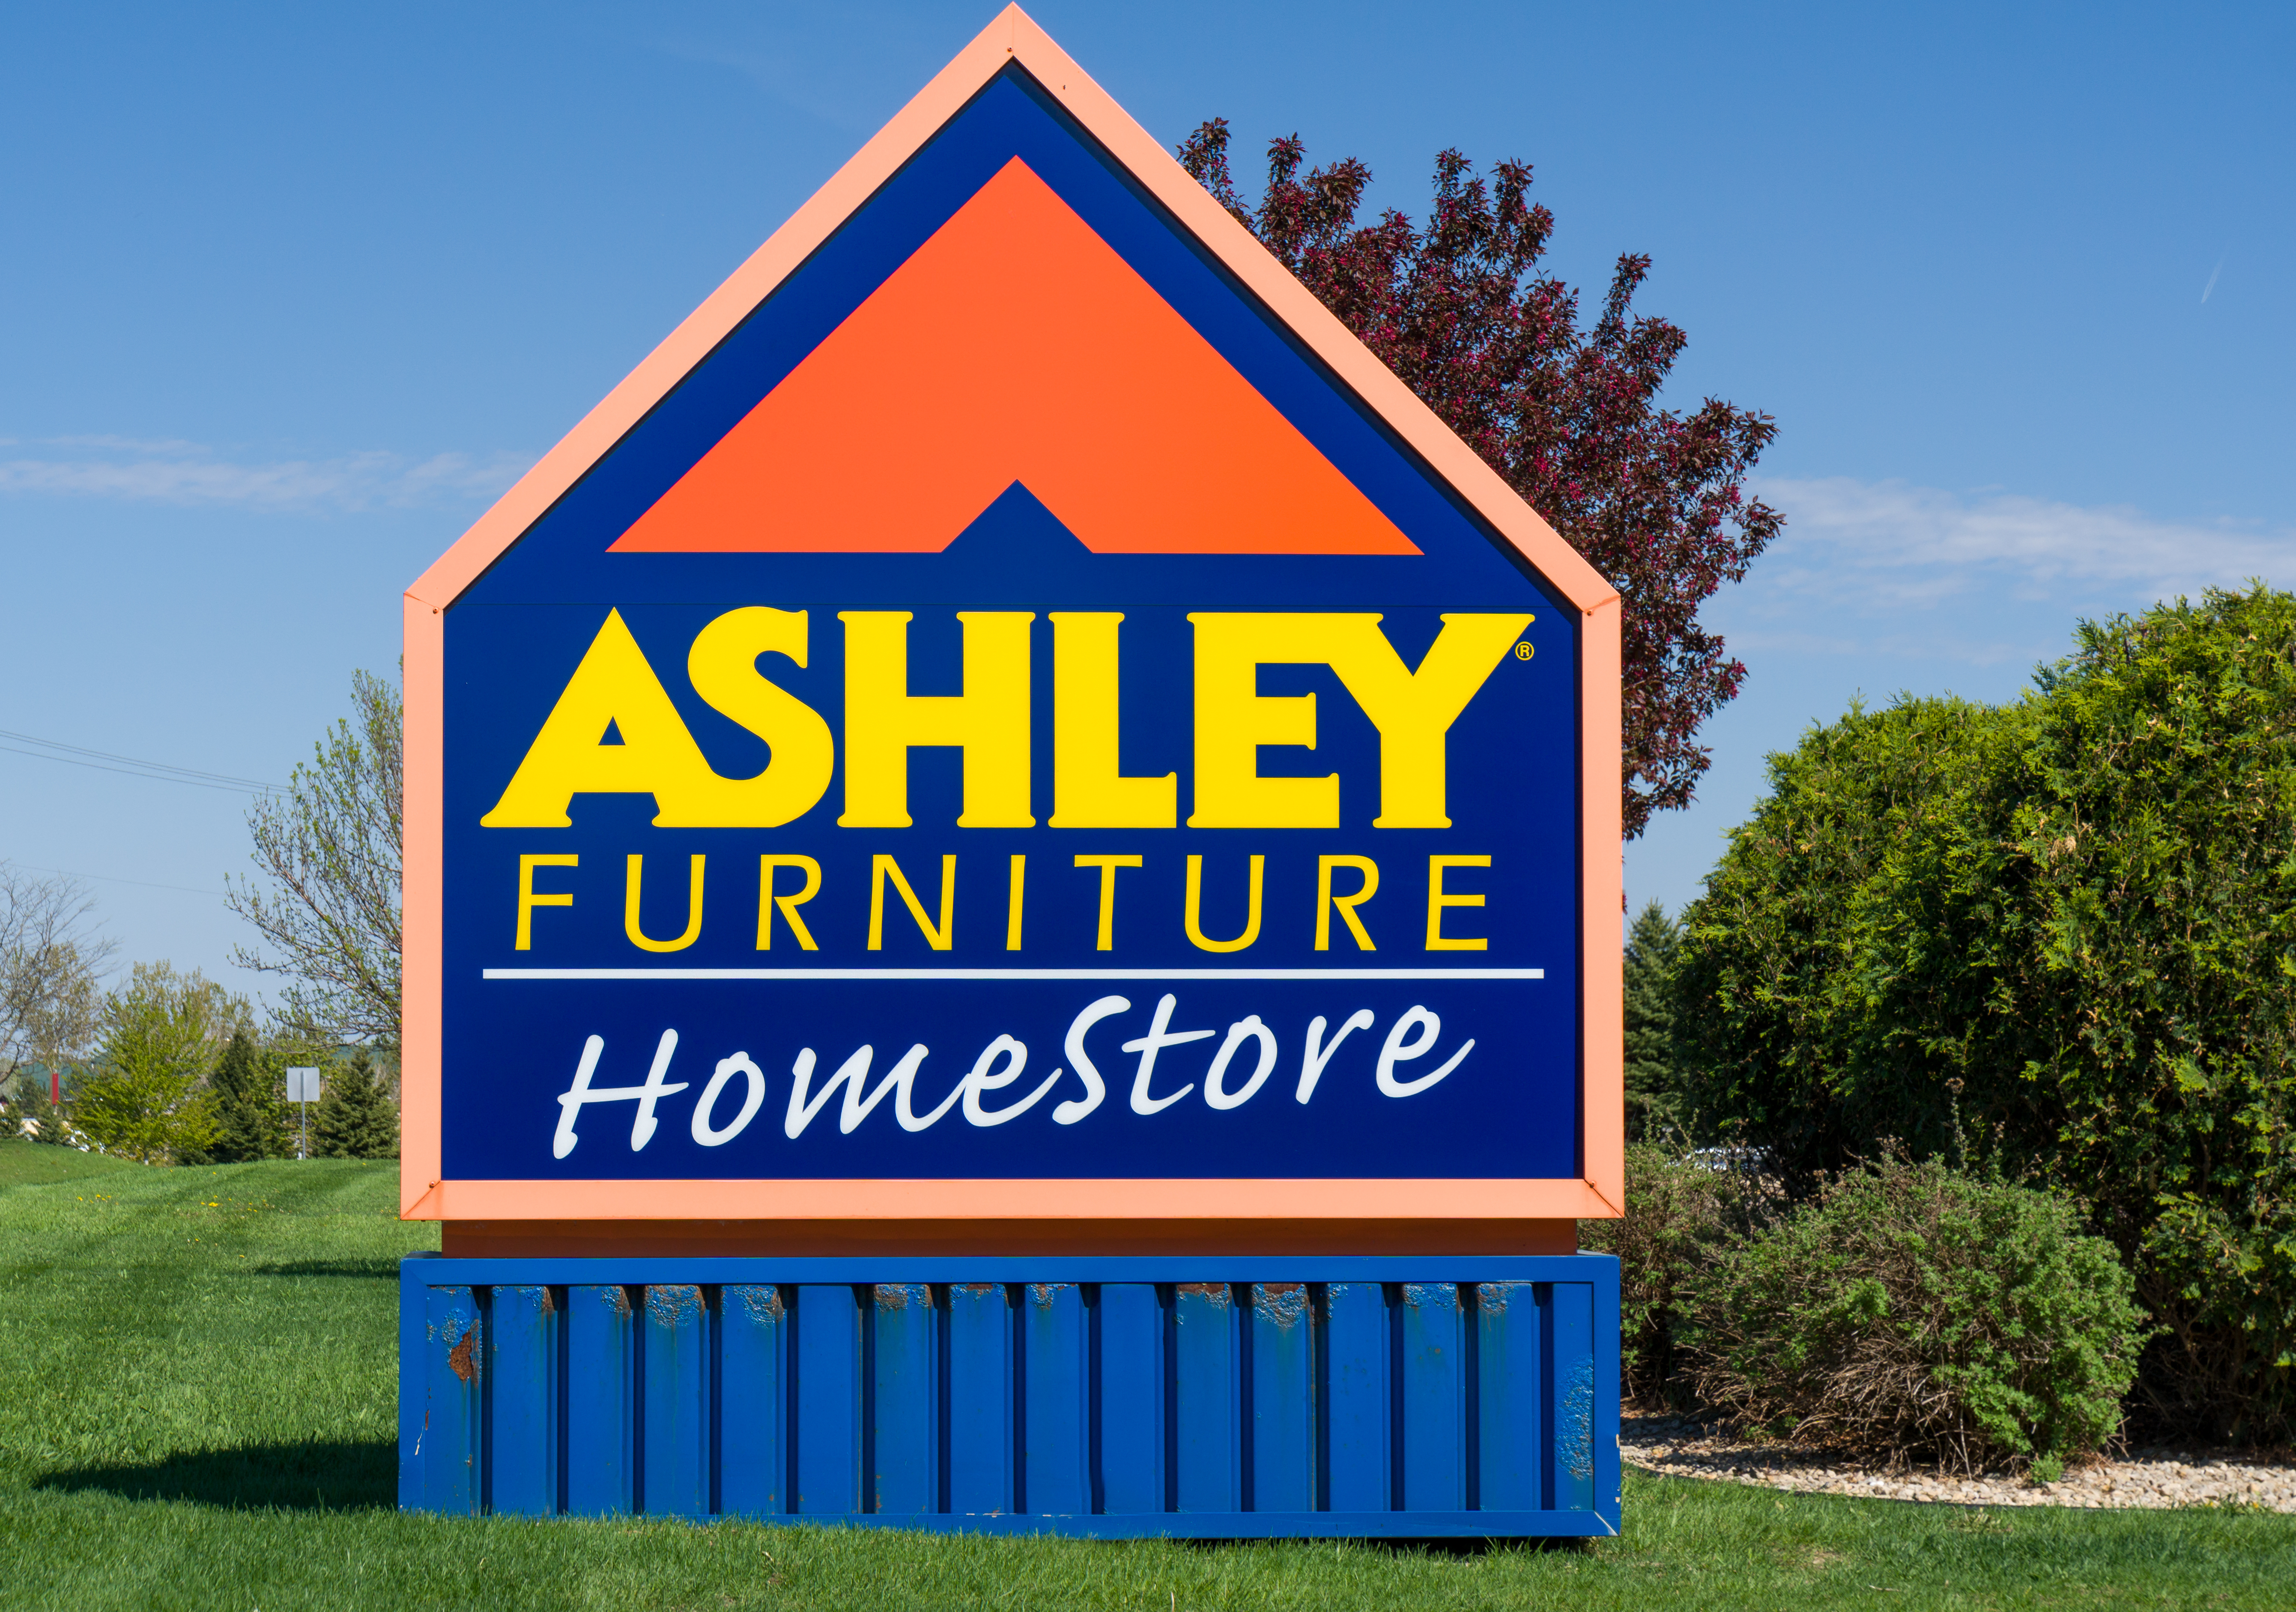 Does Ashley Furniture have good quality furniture?